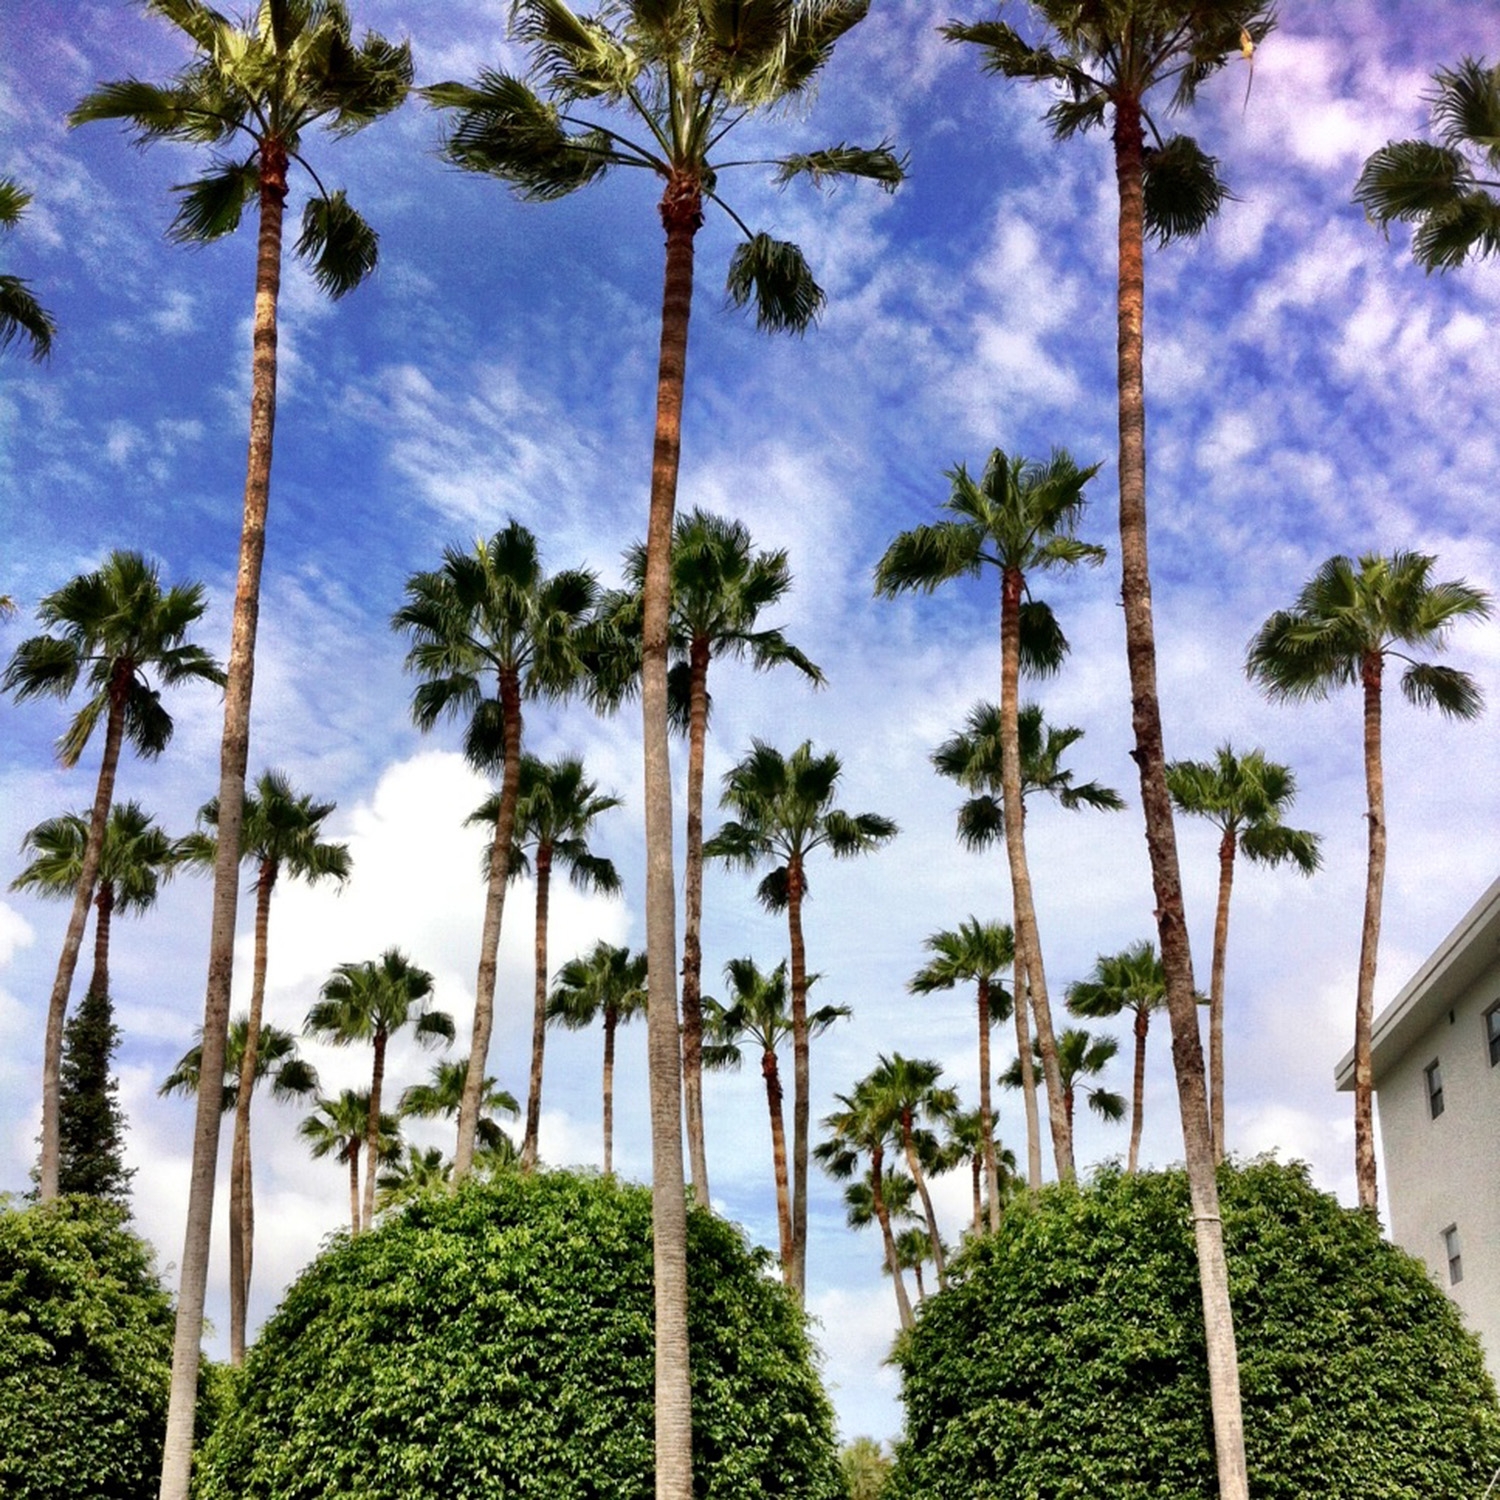 Looking up at the tall skinny palms and cloudy sky at The Delano 